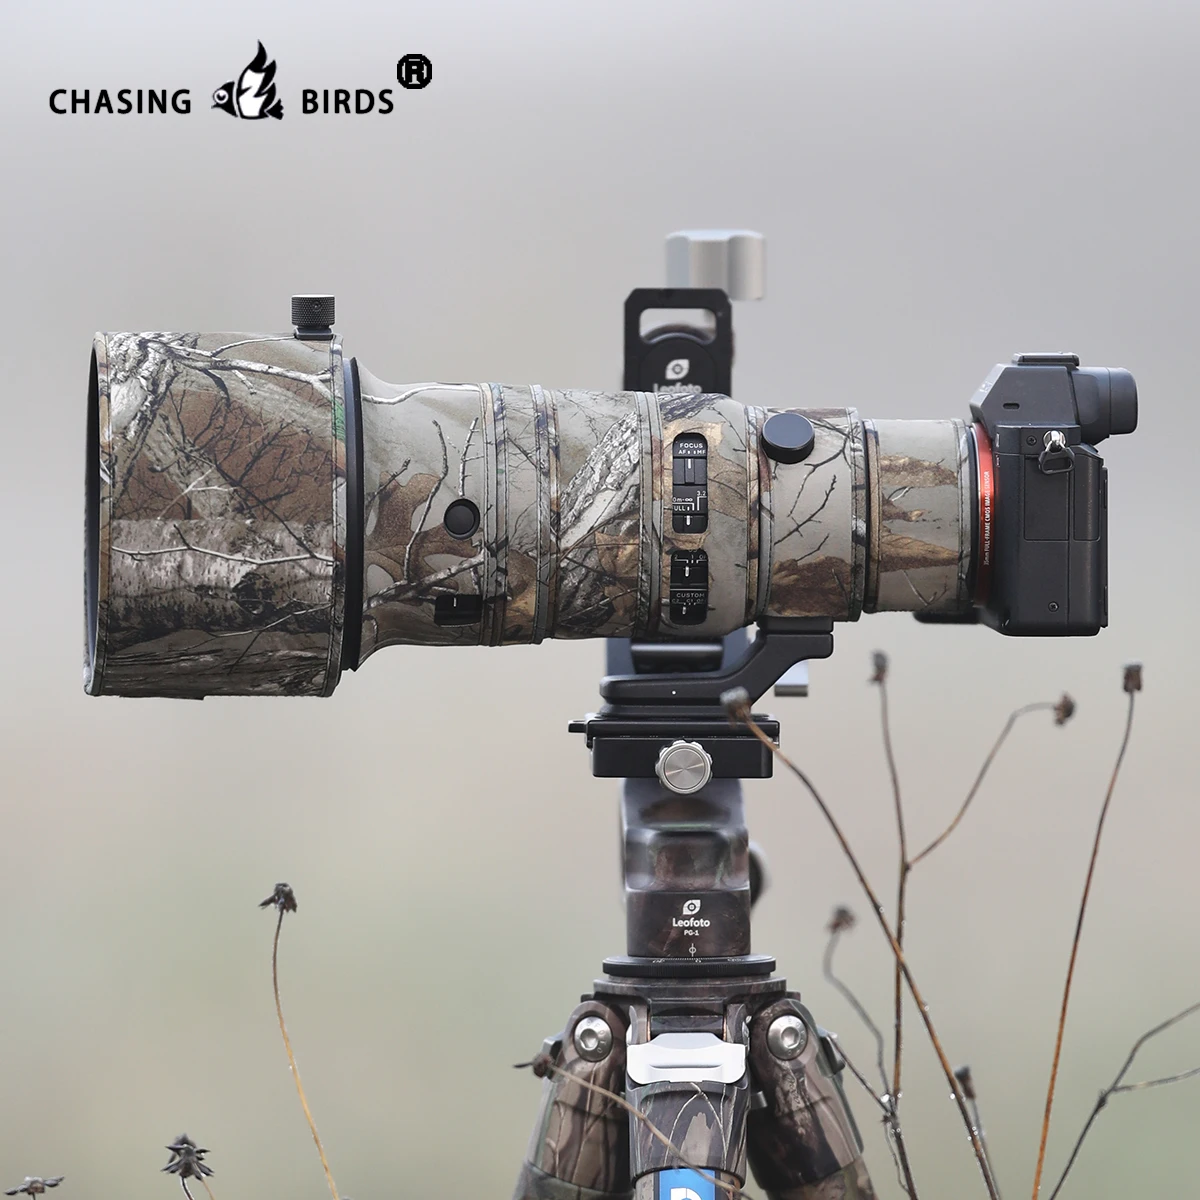 

CHASING BIRDS camouflage lens coat for SIGMA 500 mm F5.6 DG DN OS waterproof and rainproof lens protective cover for E mount